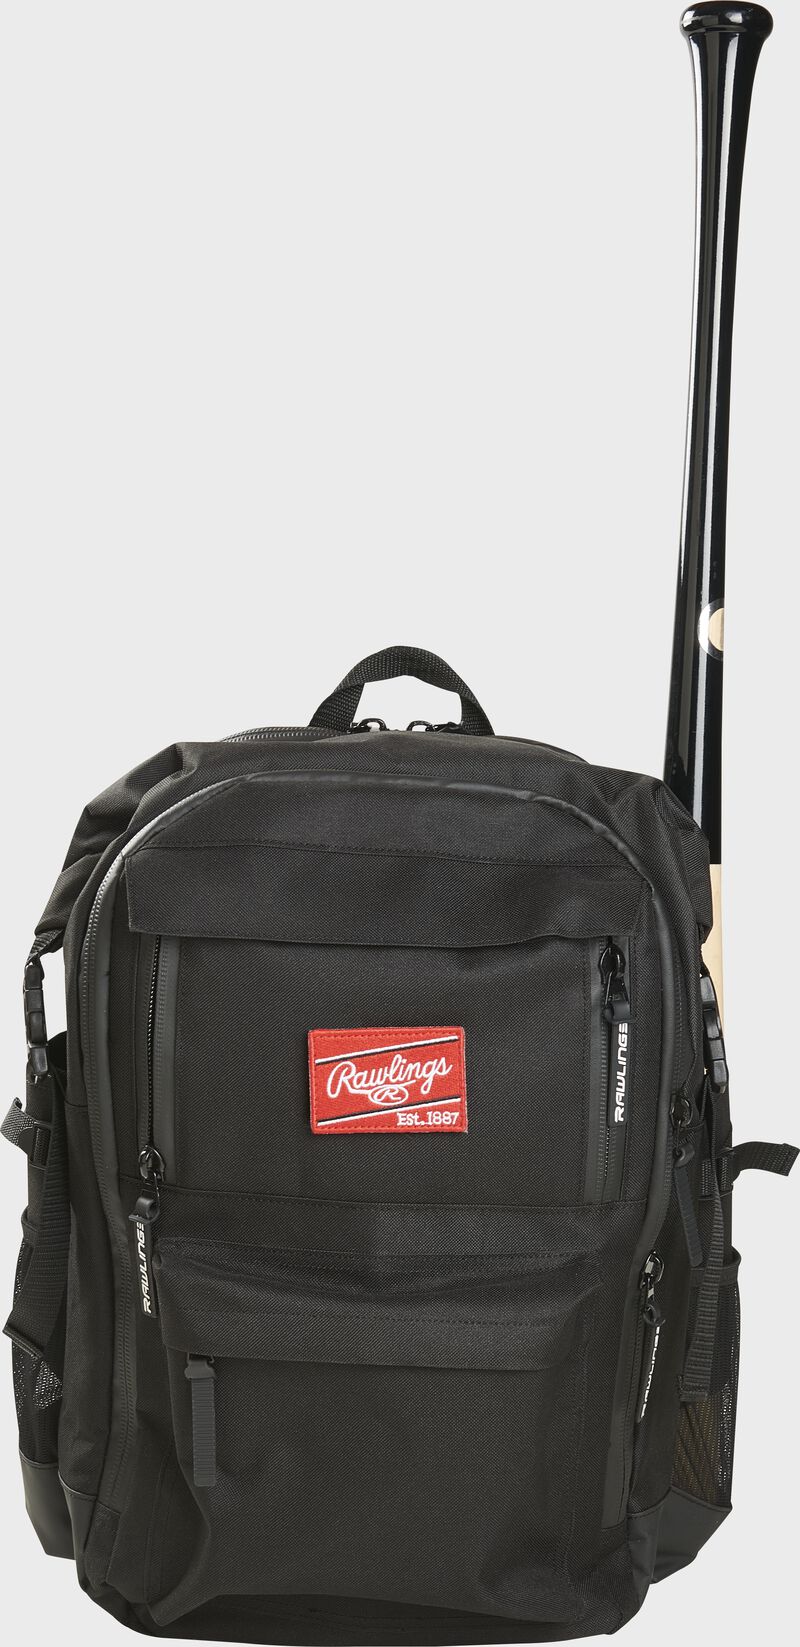 A black CEO coach's backpack with a bat in the side sleeve on one side - SKU: CEOBP-B loading=